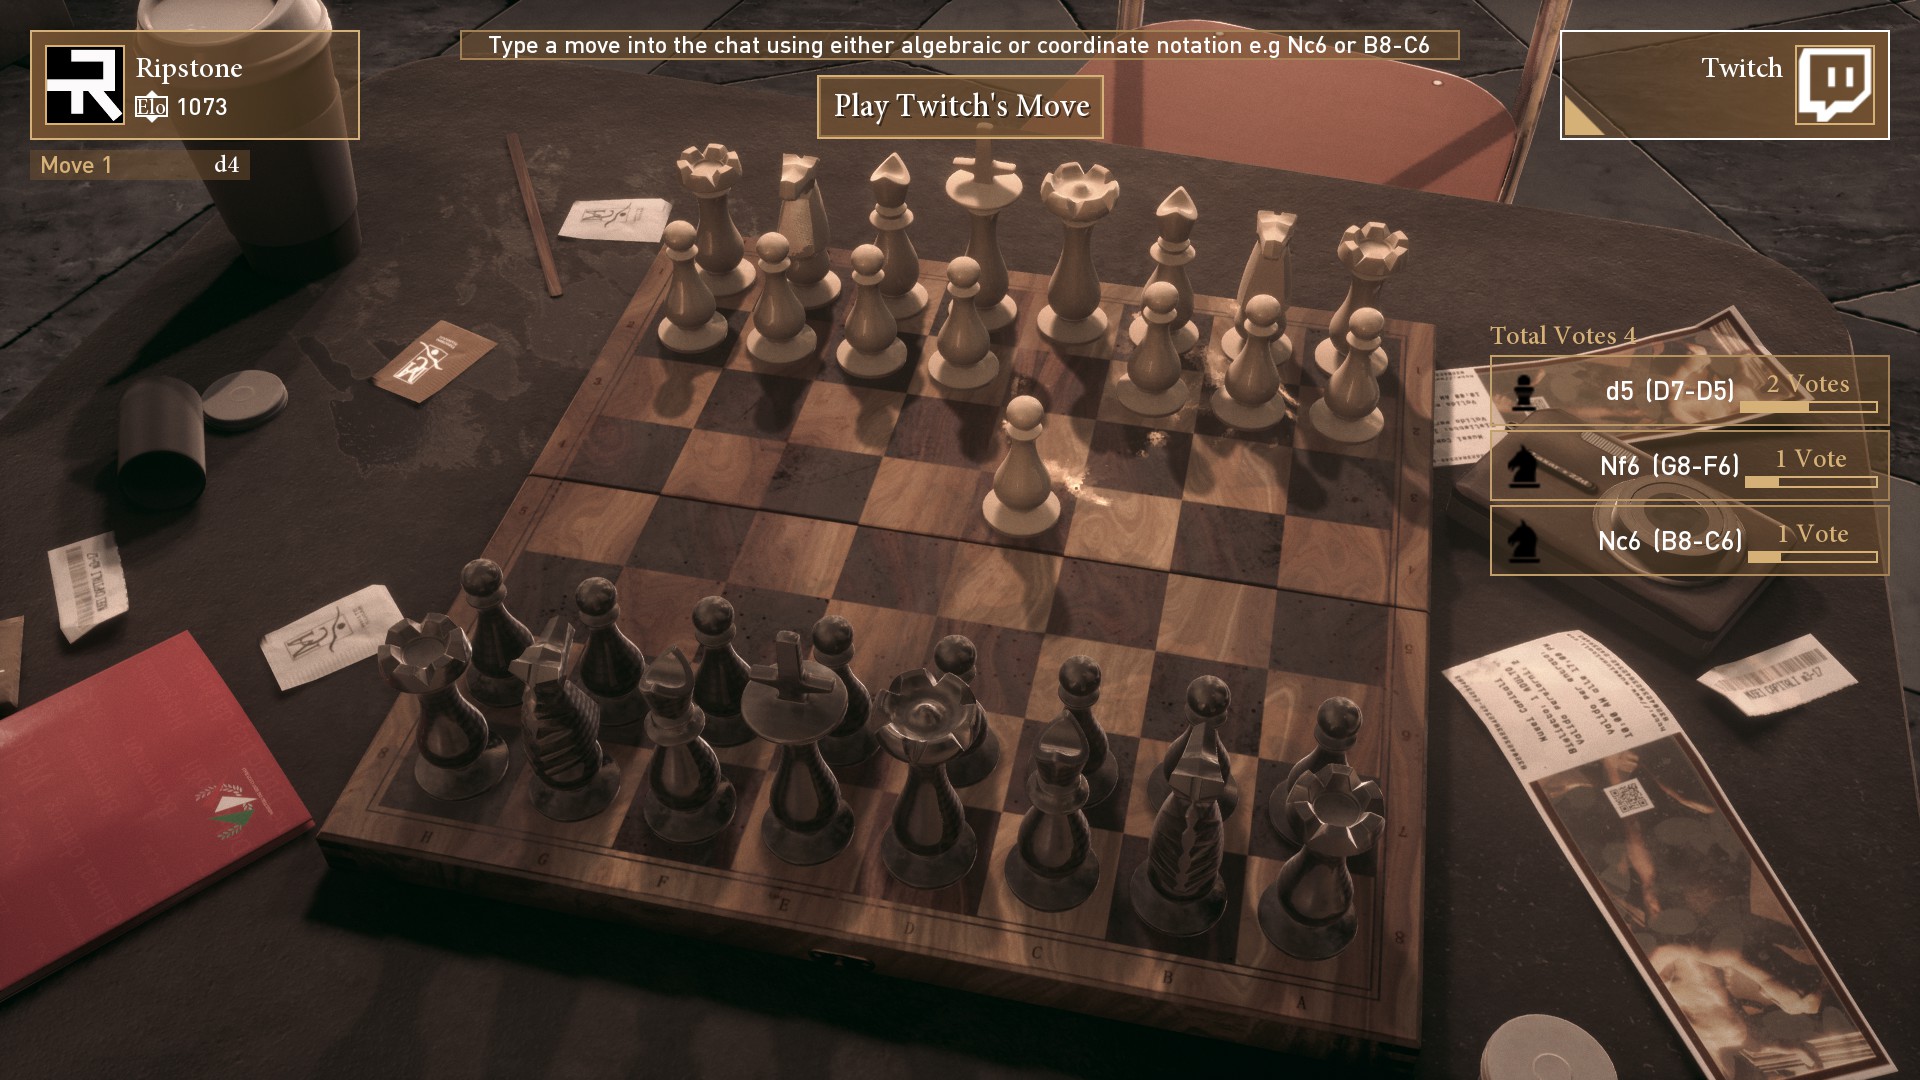 Chess Ultra - Look the beauty of this game! Available on Steam and Epic  Games. 